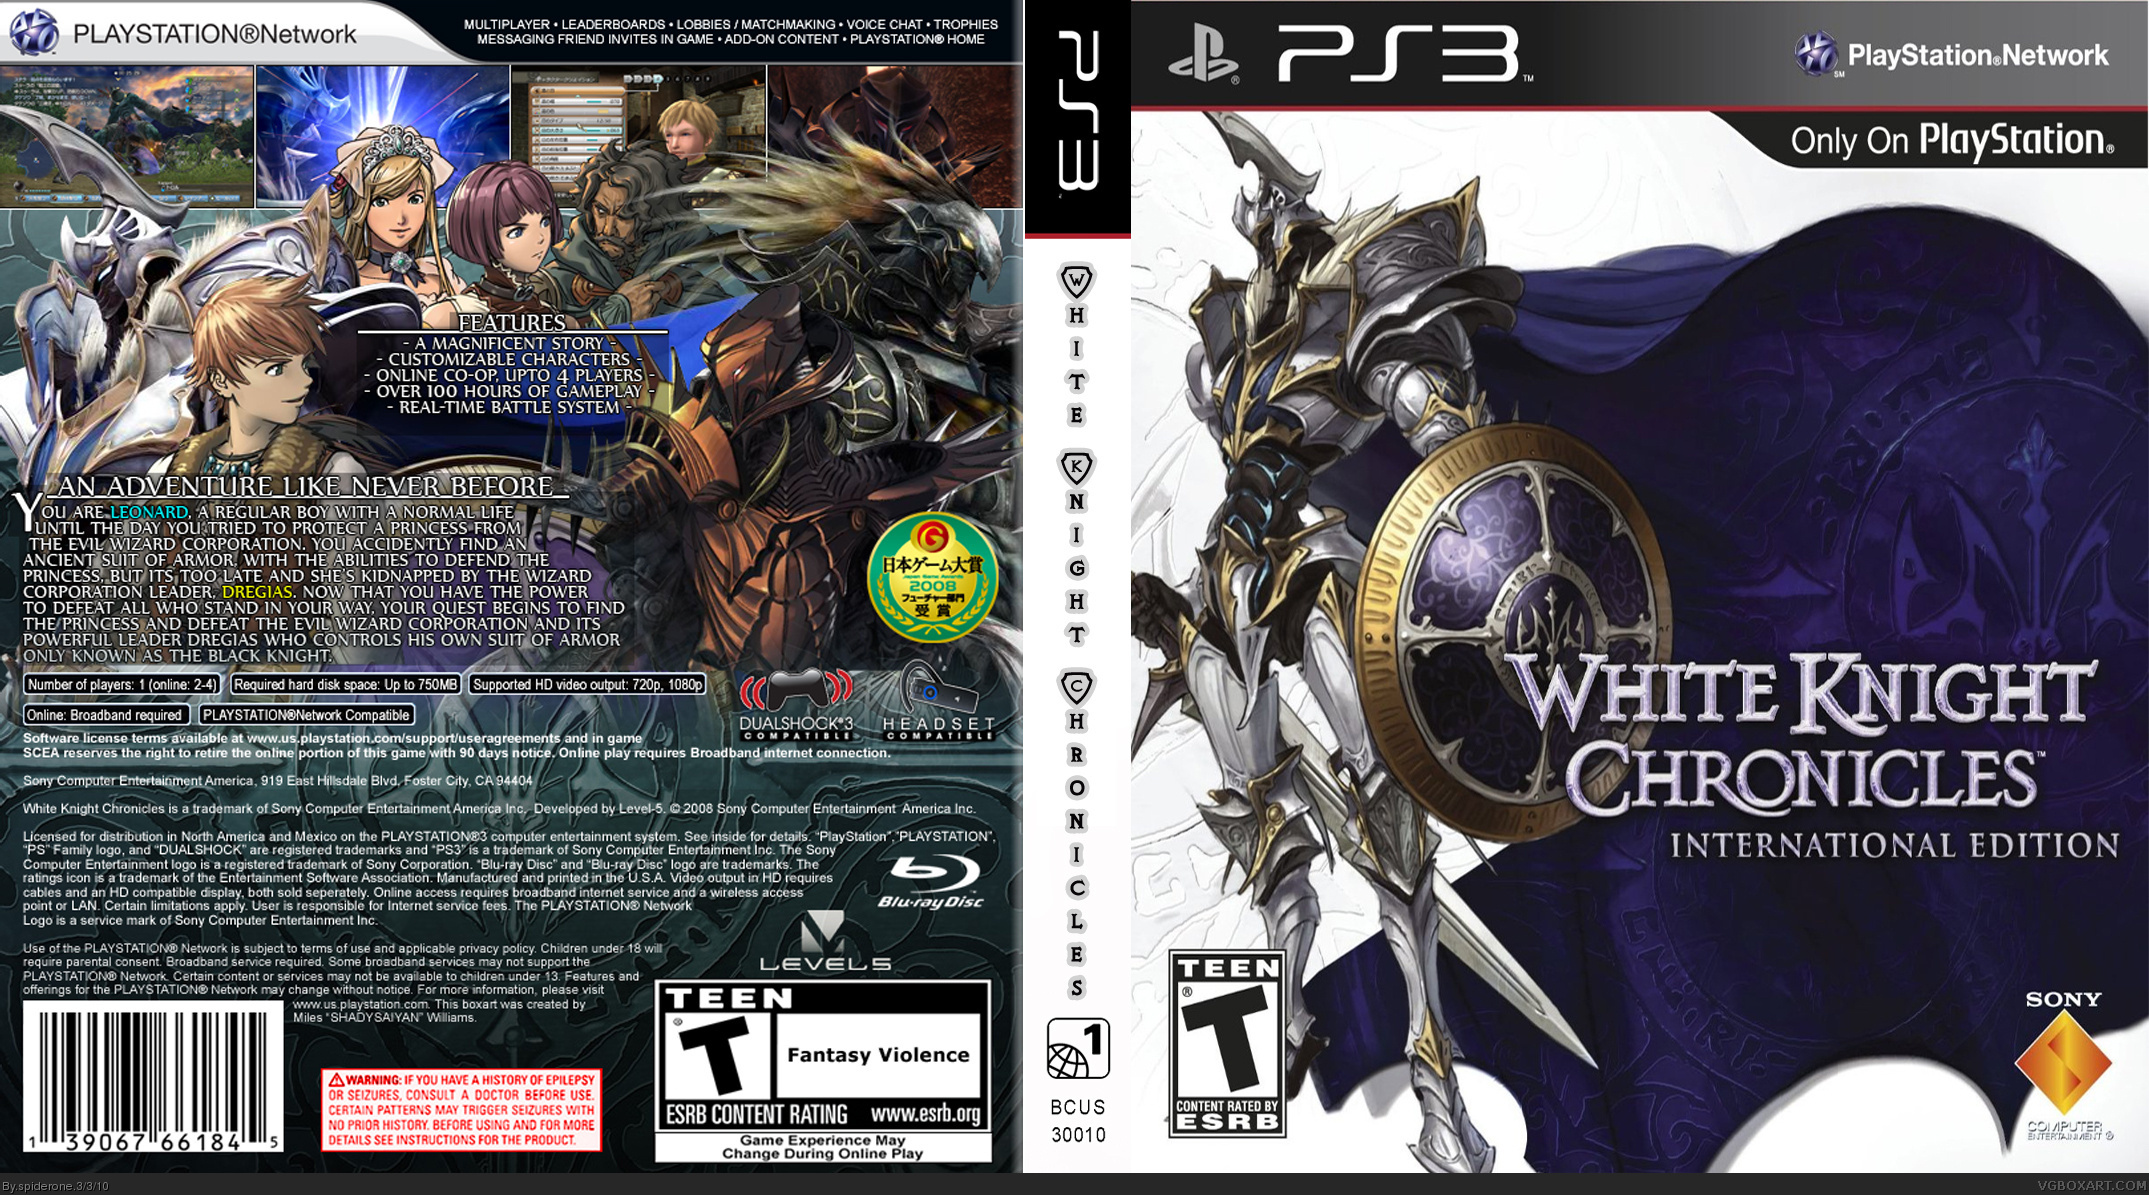 Viewing full size White Knight Chronicles box cover